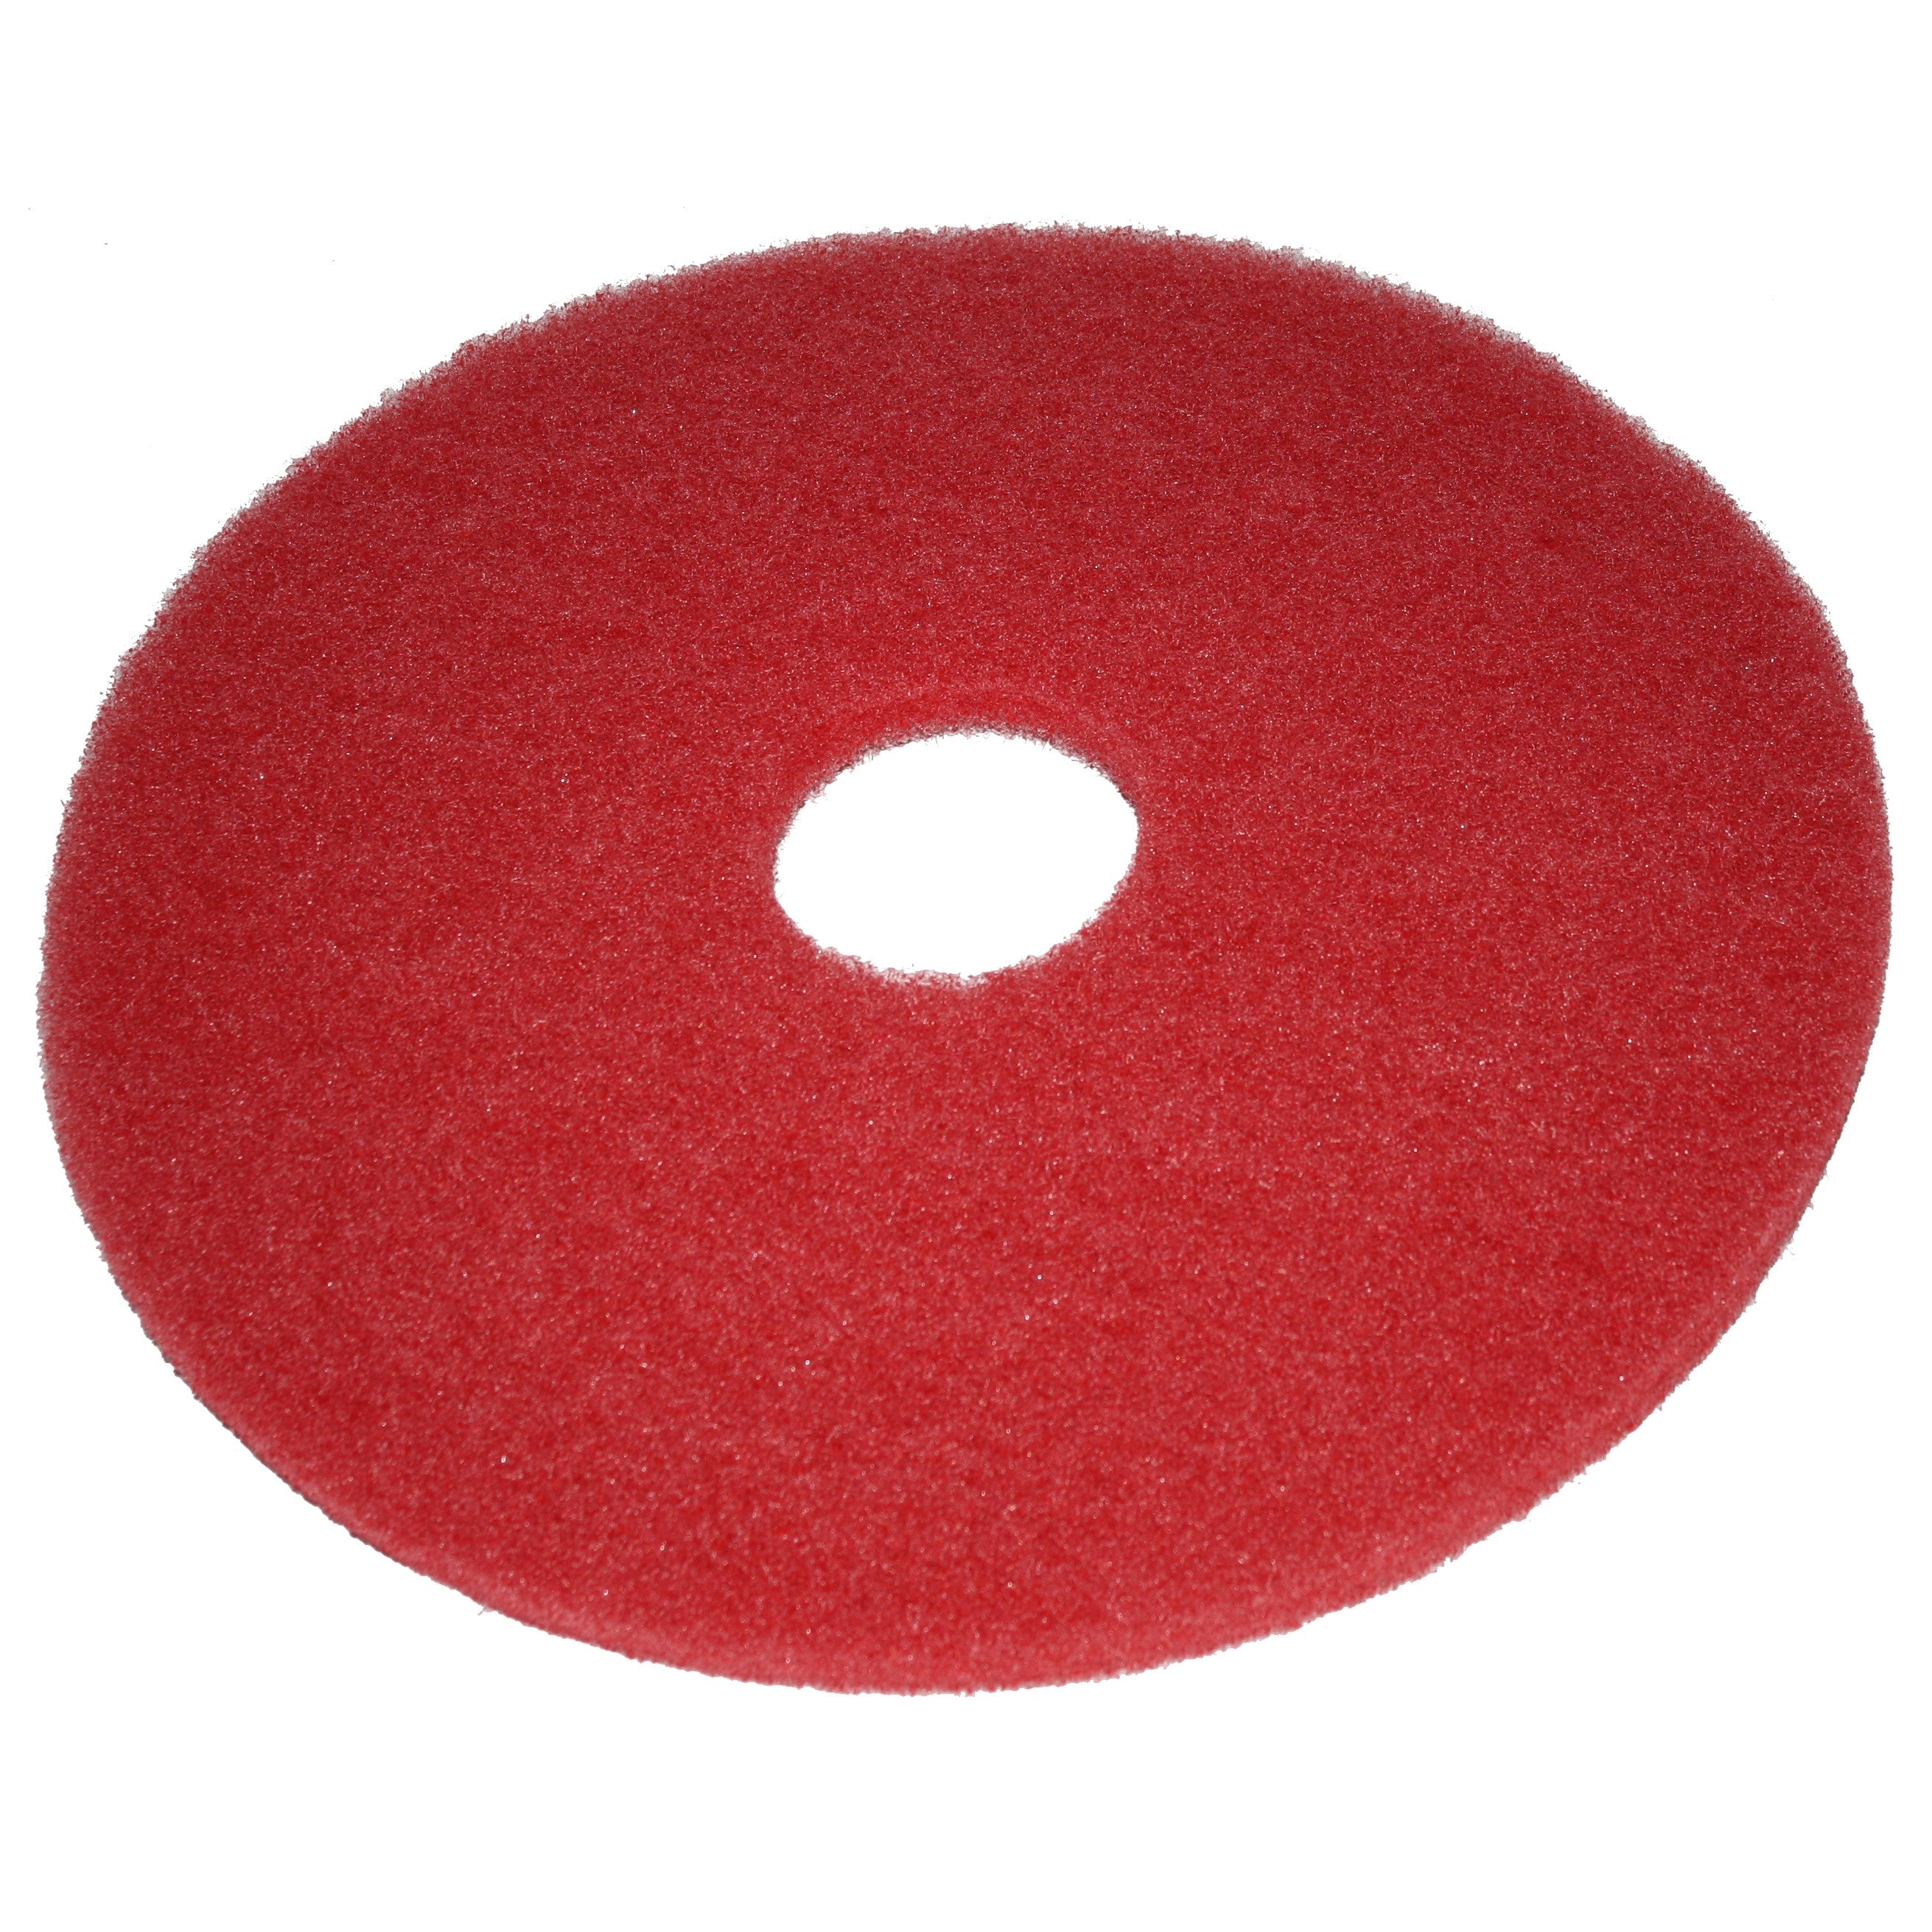 Pad rouge, Ø 432 mm, polyester